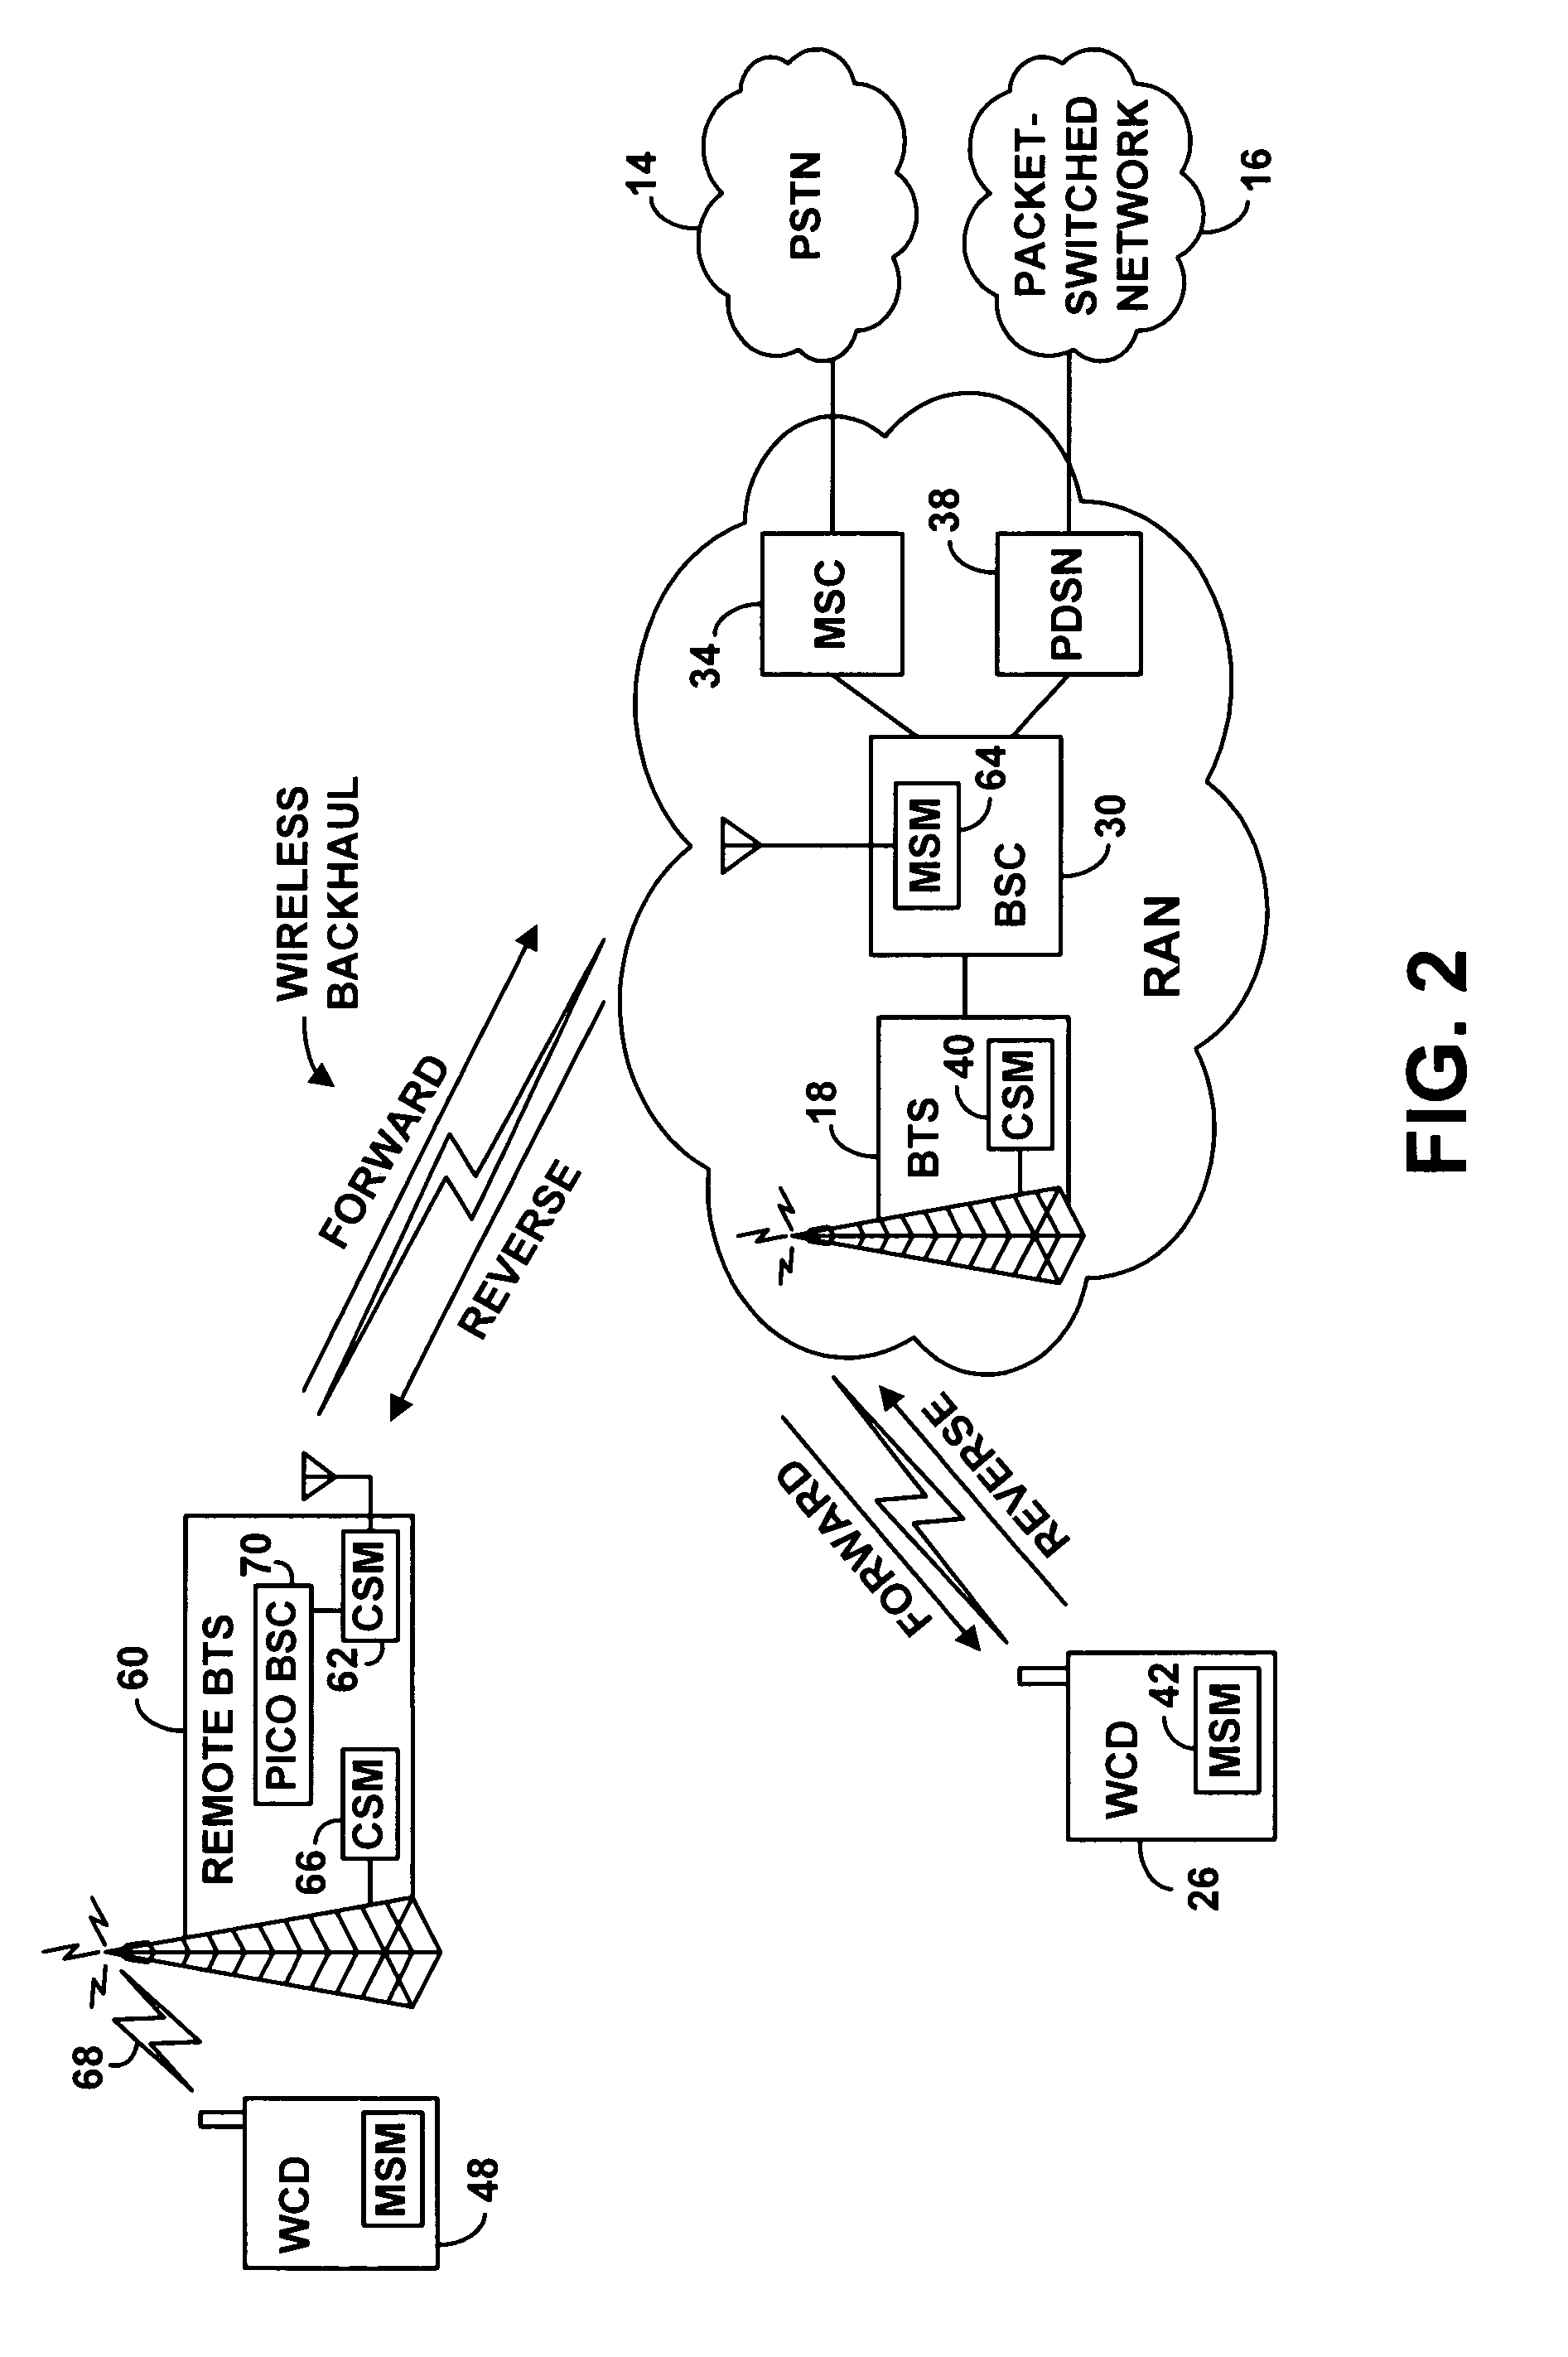 Method and system for wireless backhaul communication between a radio access network and a remote base station